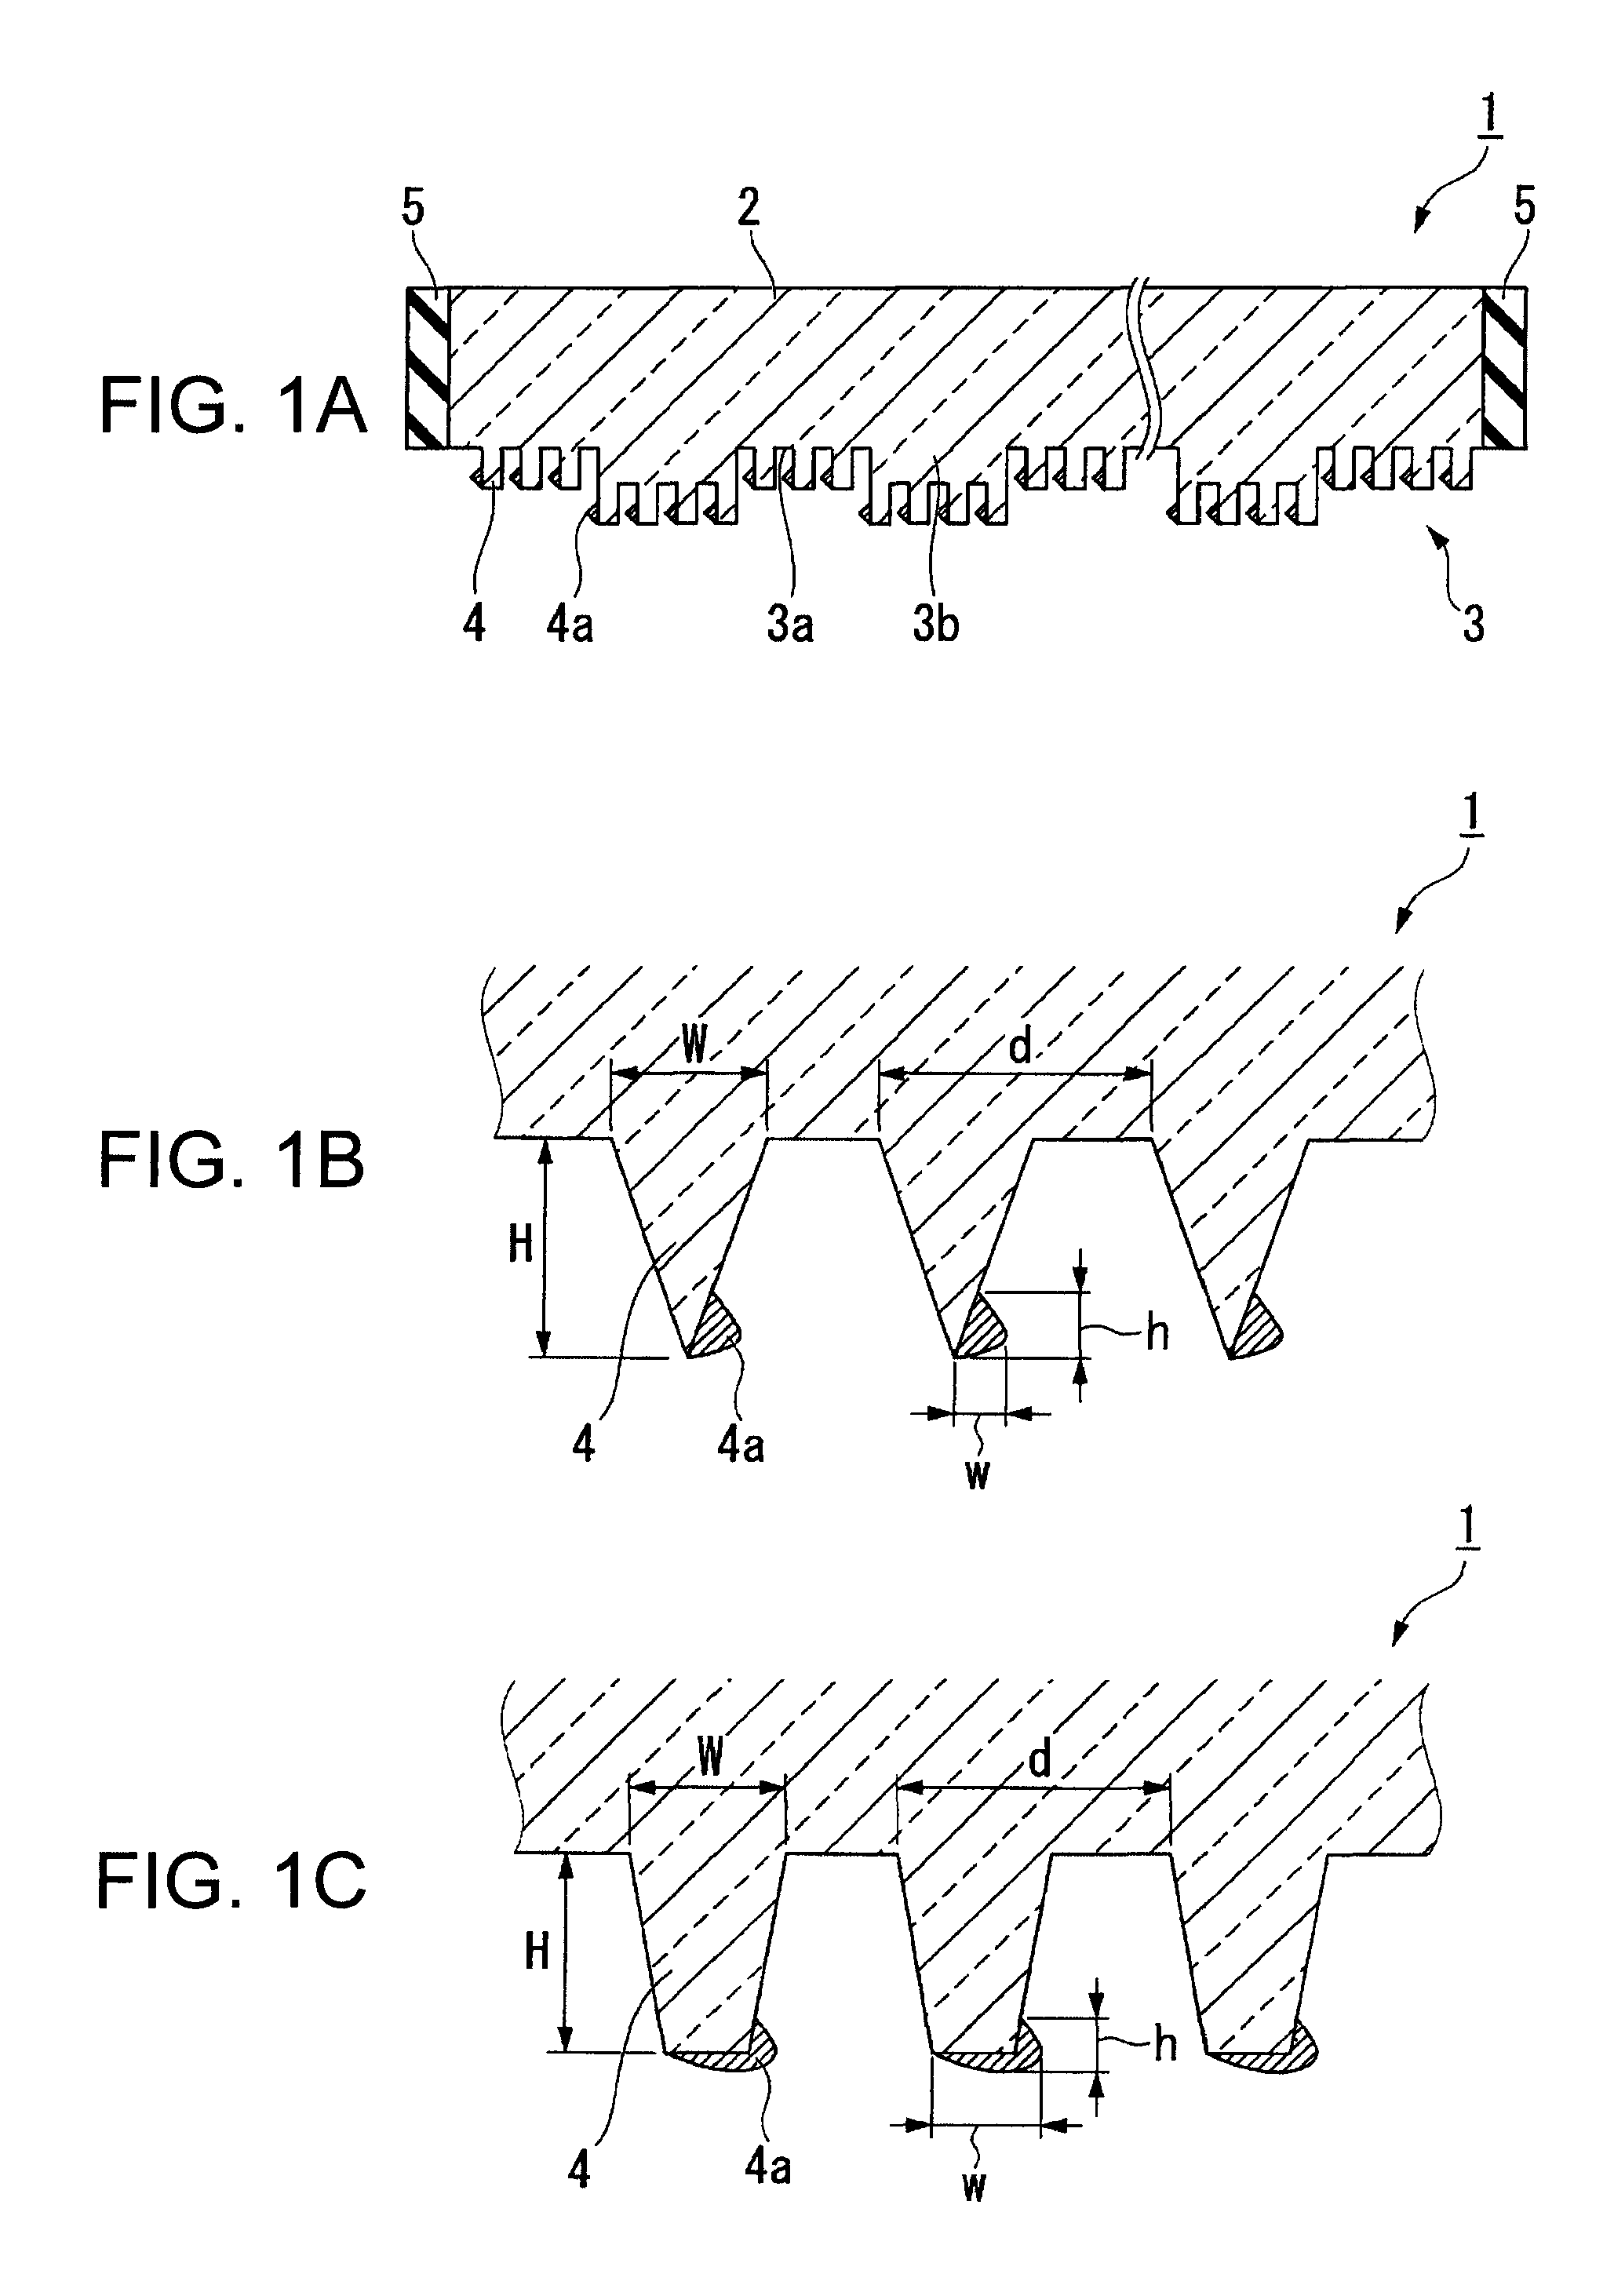 Method for manufacturing an optical element to polarize and split incident light